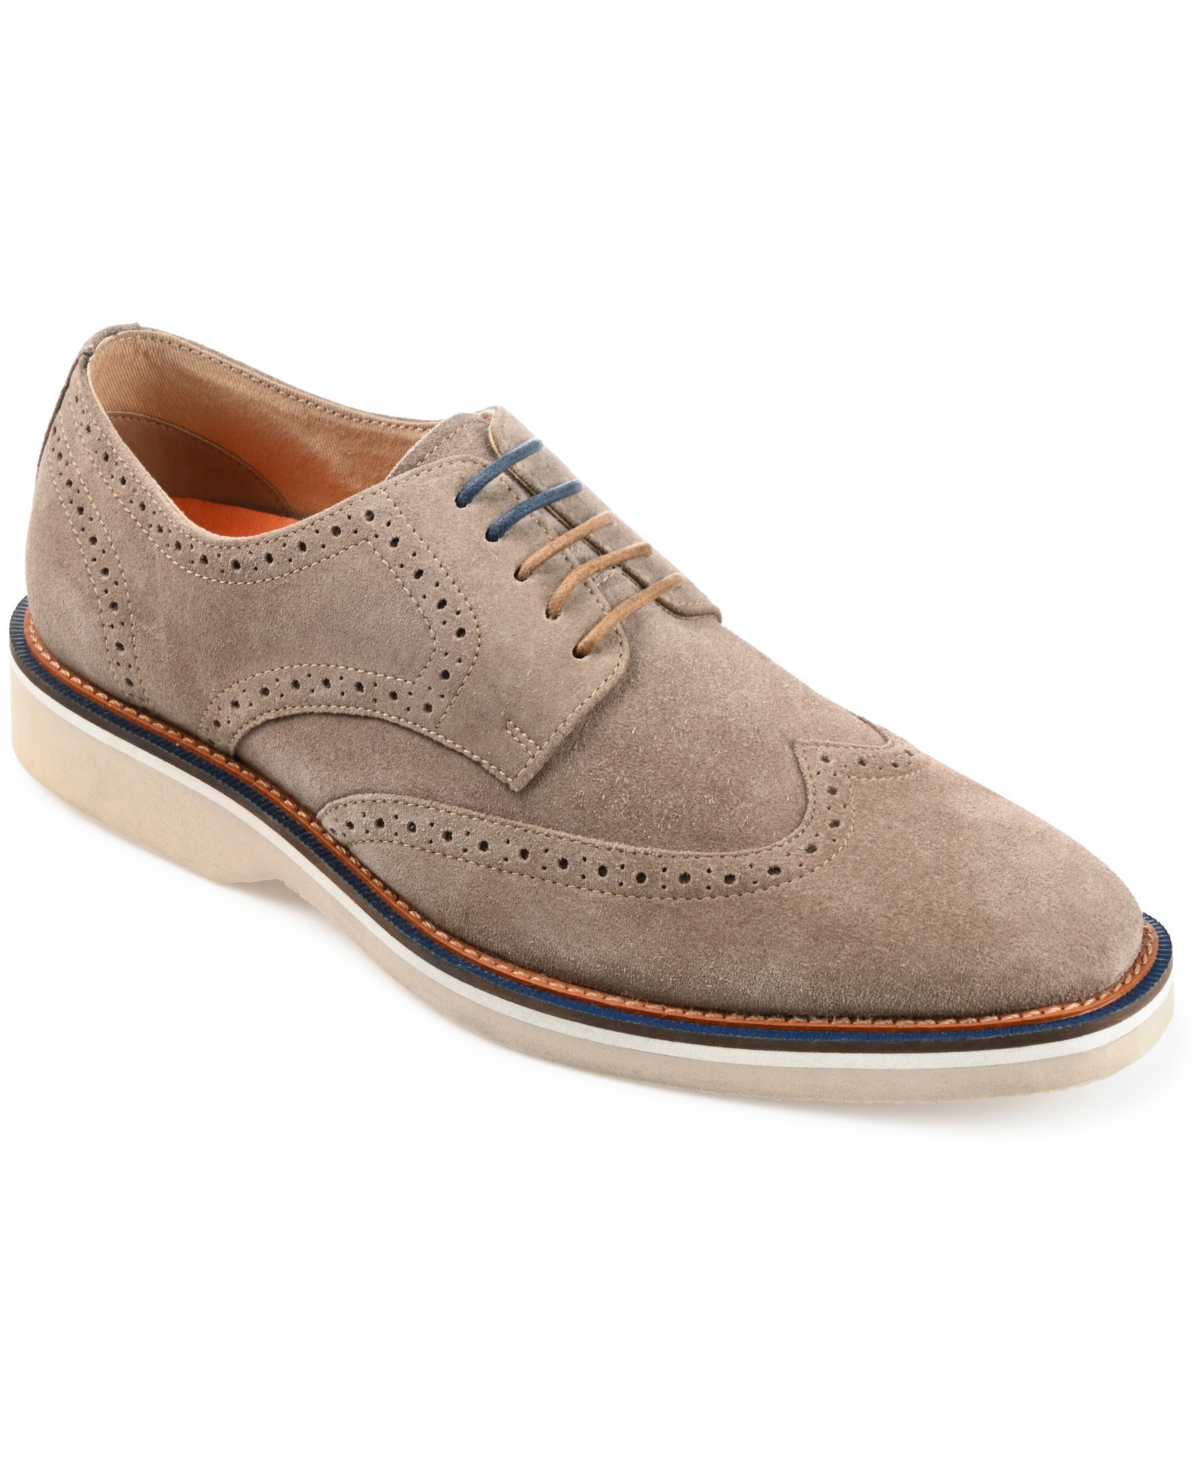 Men's Chadwick Wingtip Derby Dress Shoes - Taupe